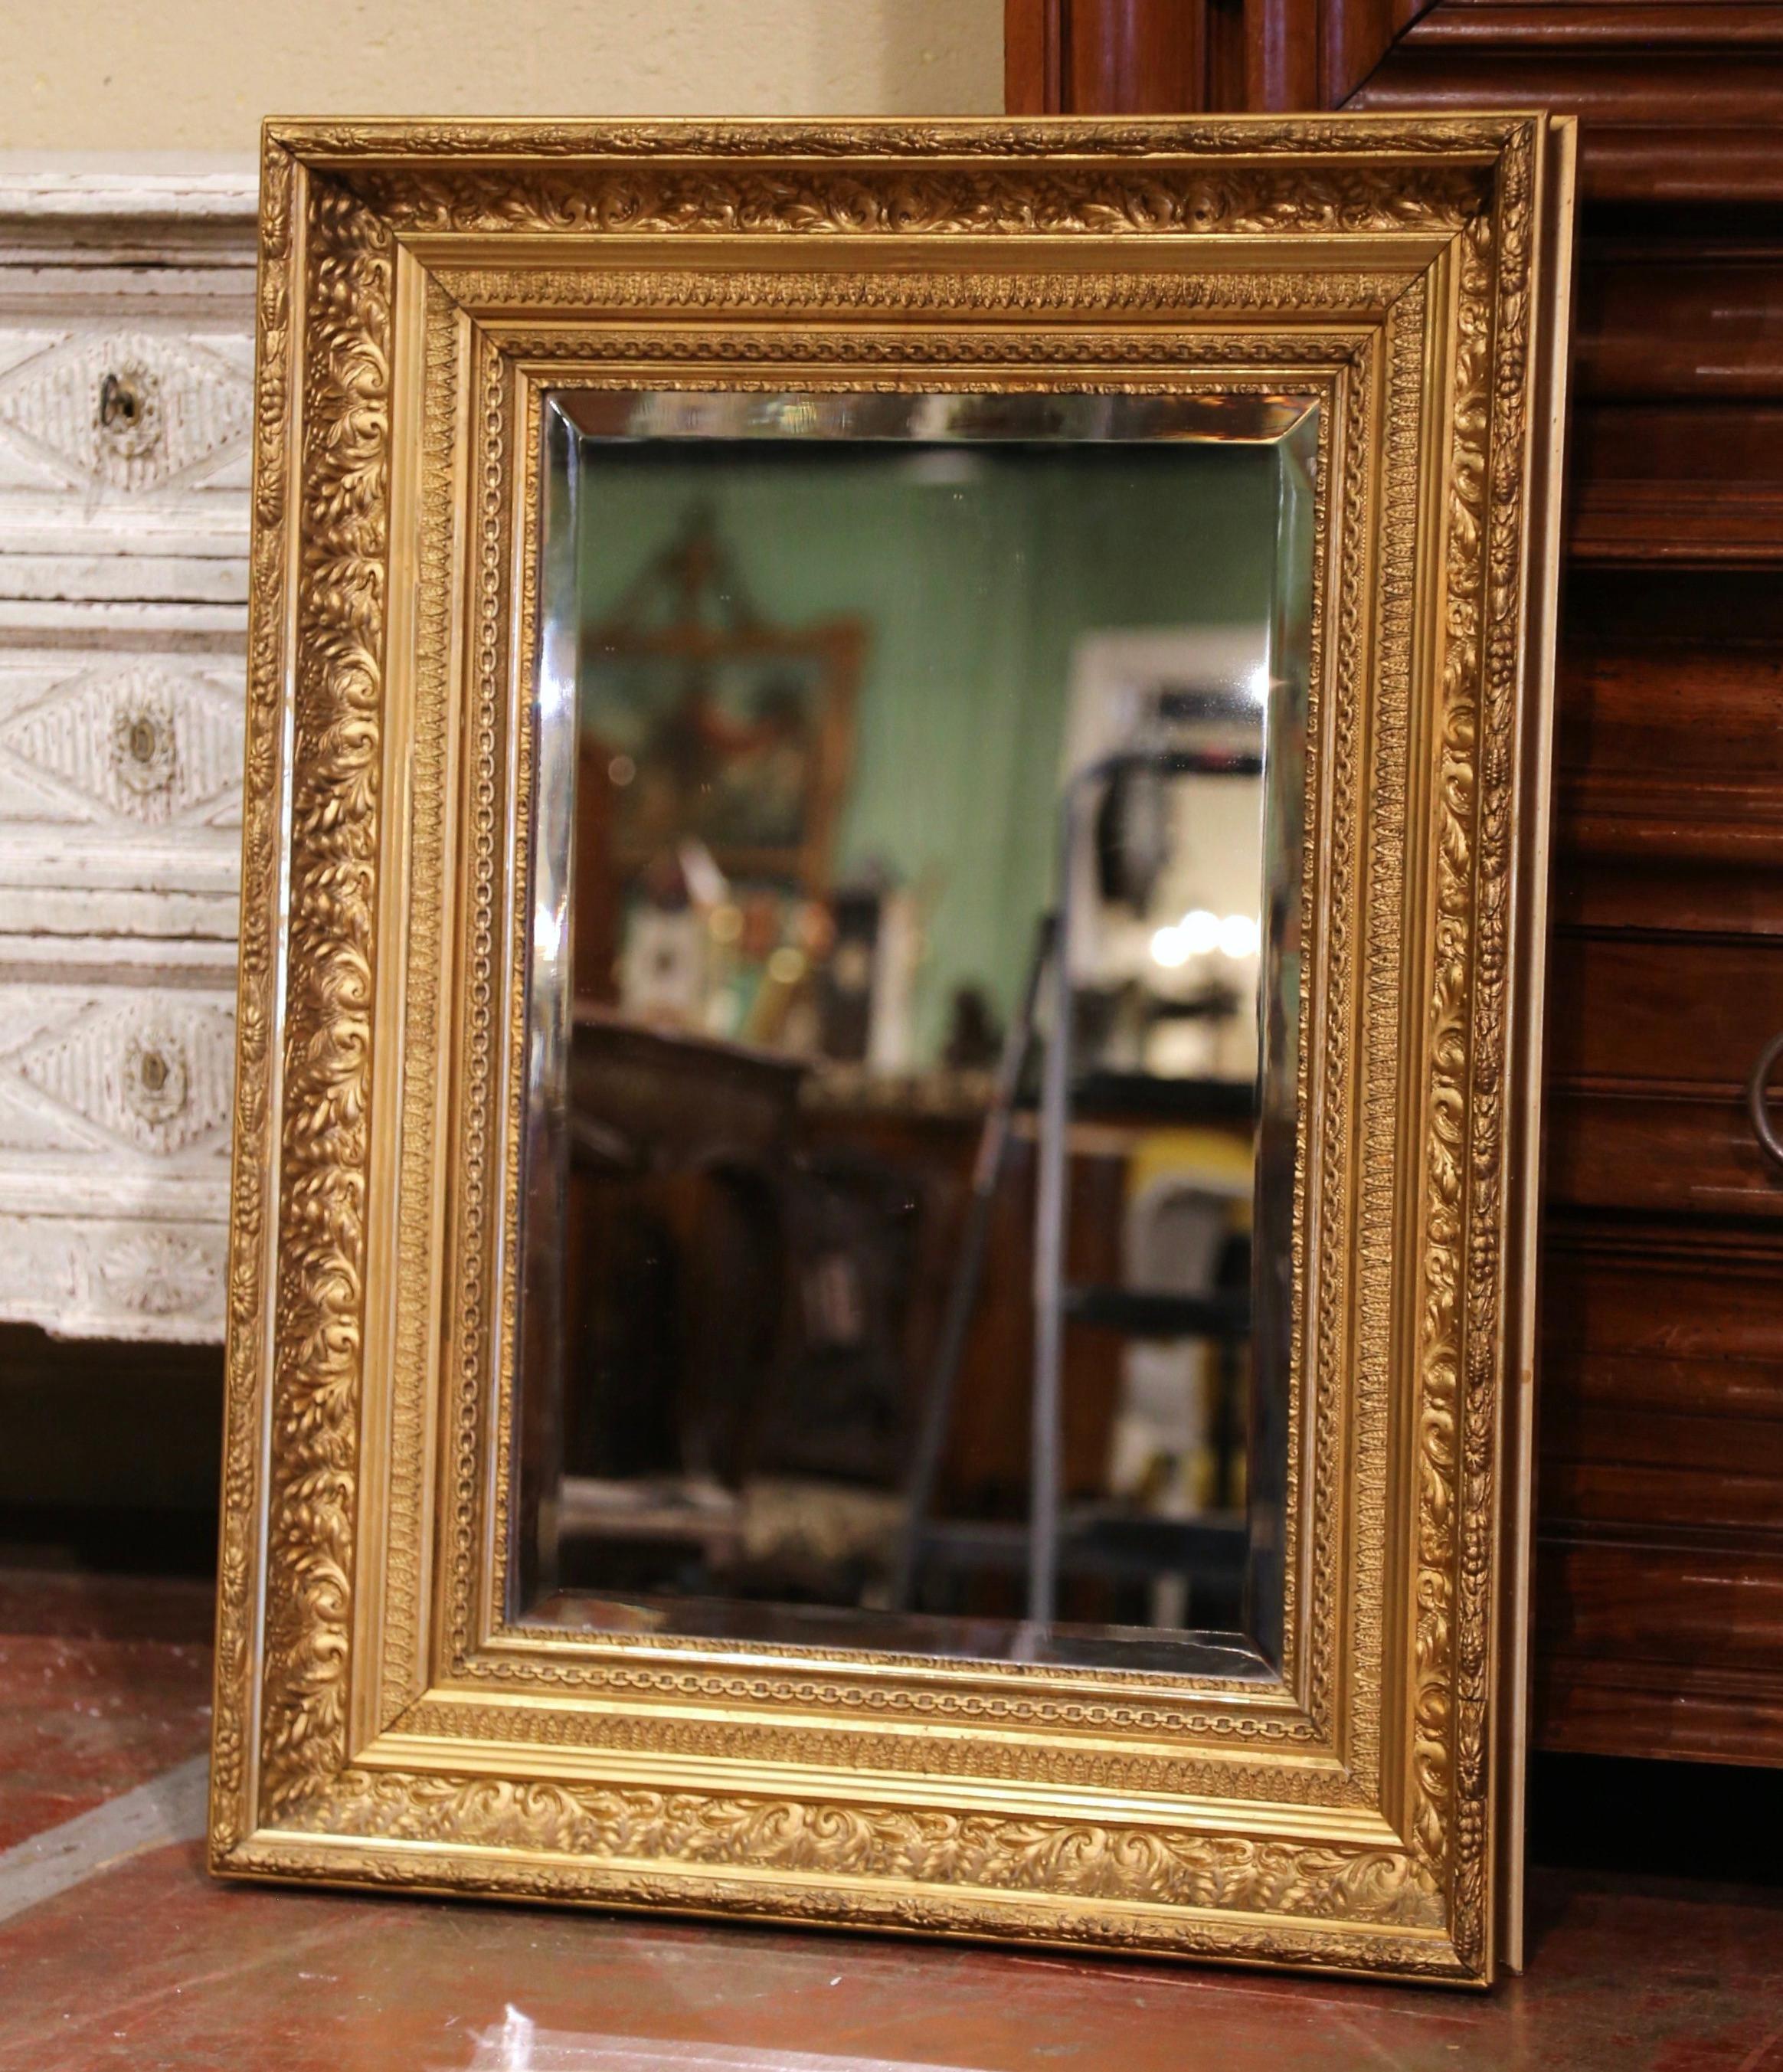 Decorate a powder room, entryway or bedroom with this elegant antique gold leaf mirror. Crafted in the Burgundy region of France, circa 1870, the rectangular mirror has traditional lines decorated with carved floral, leaf and fruit motifs in high